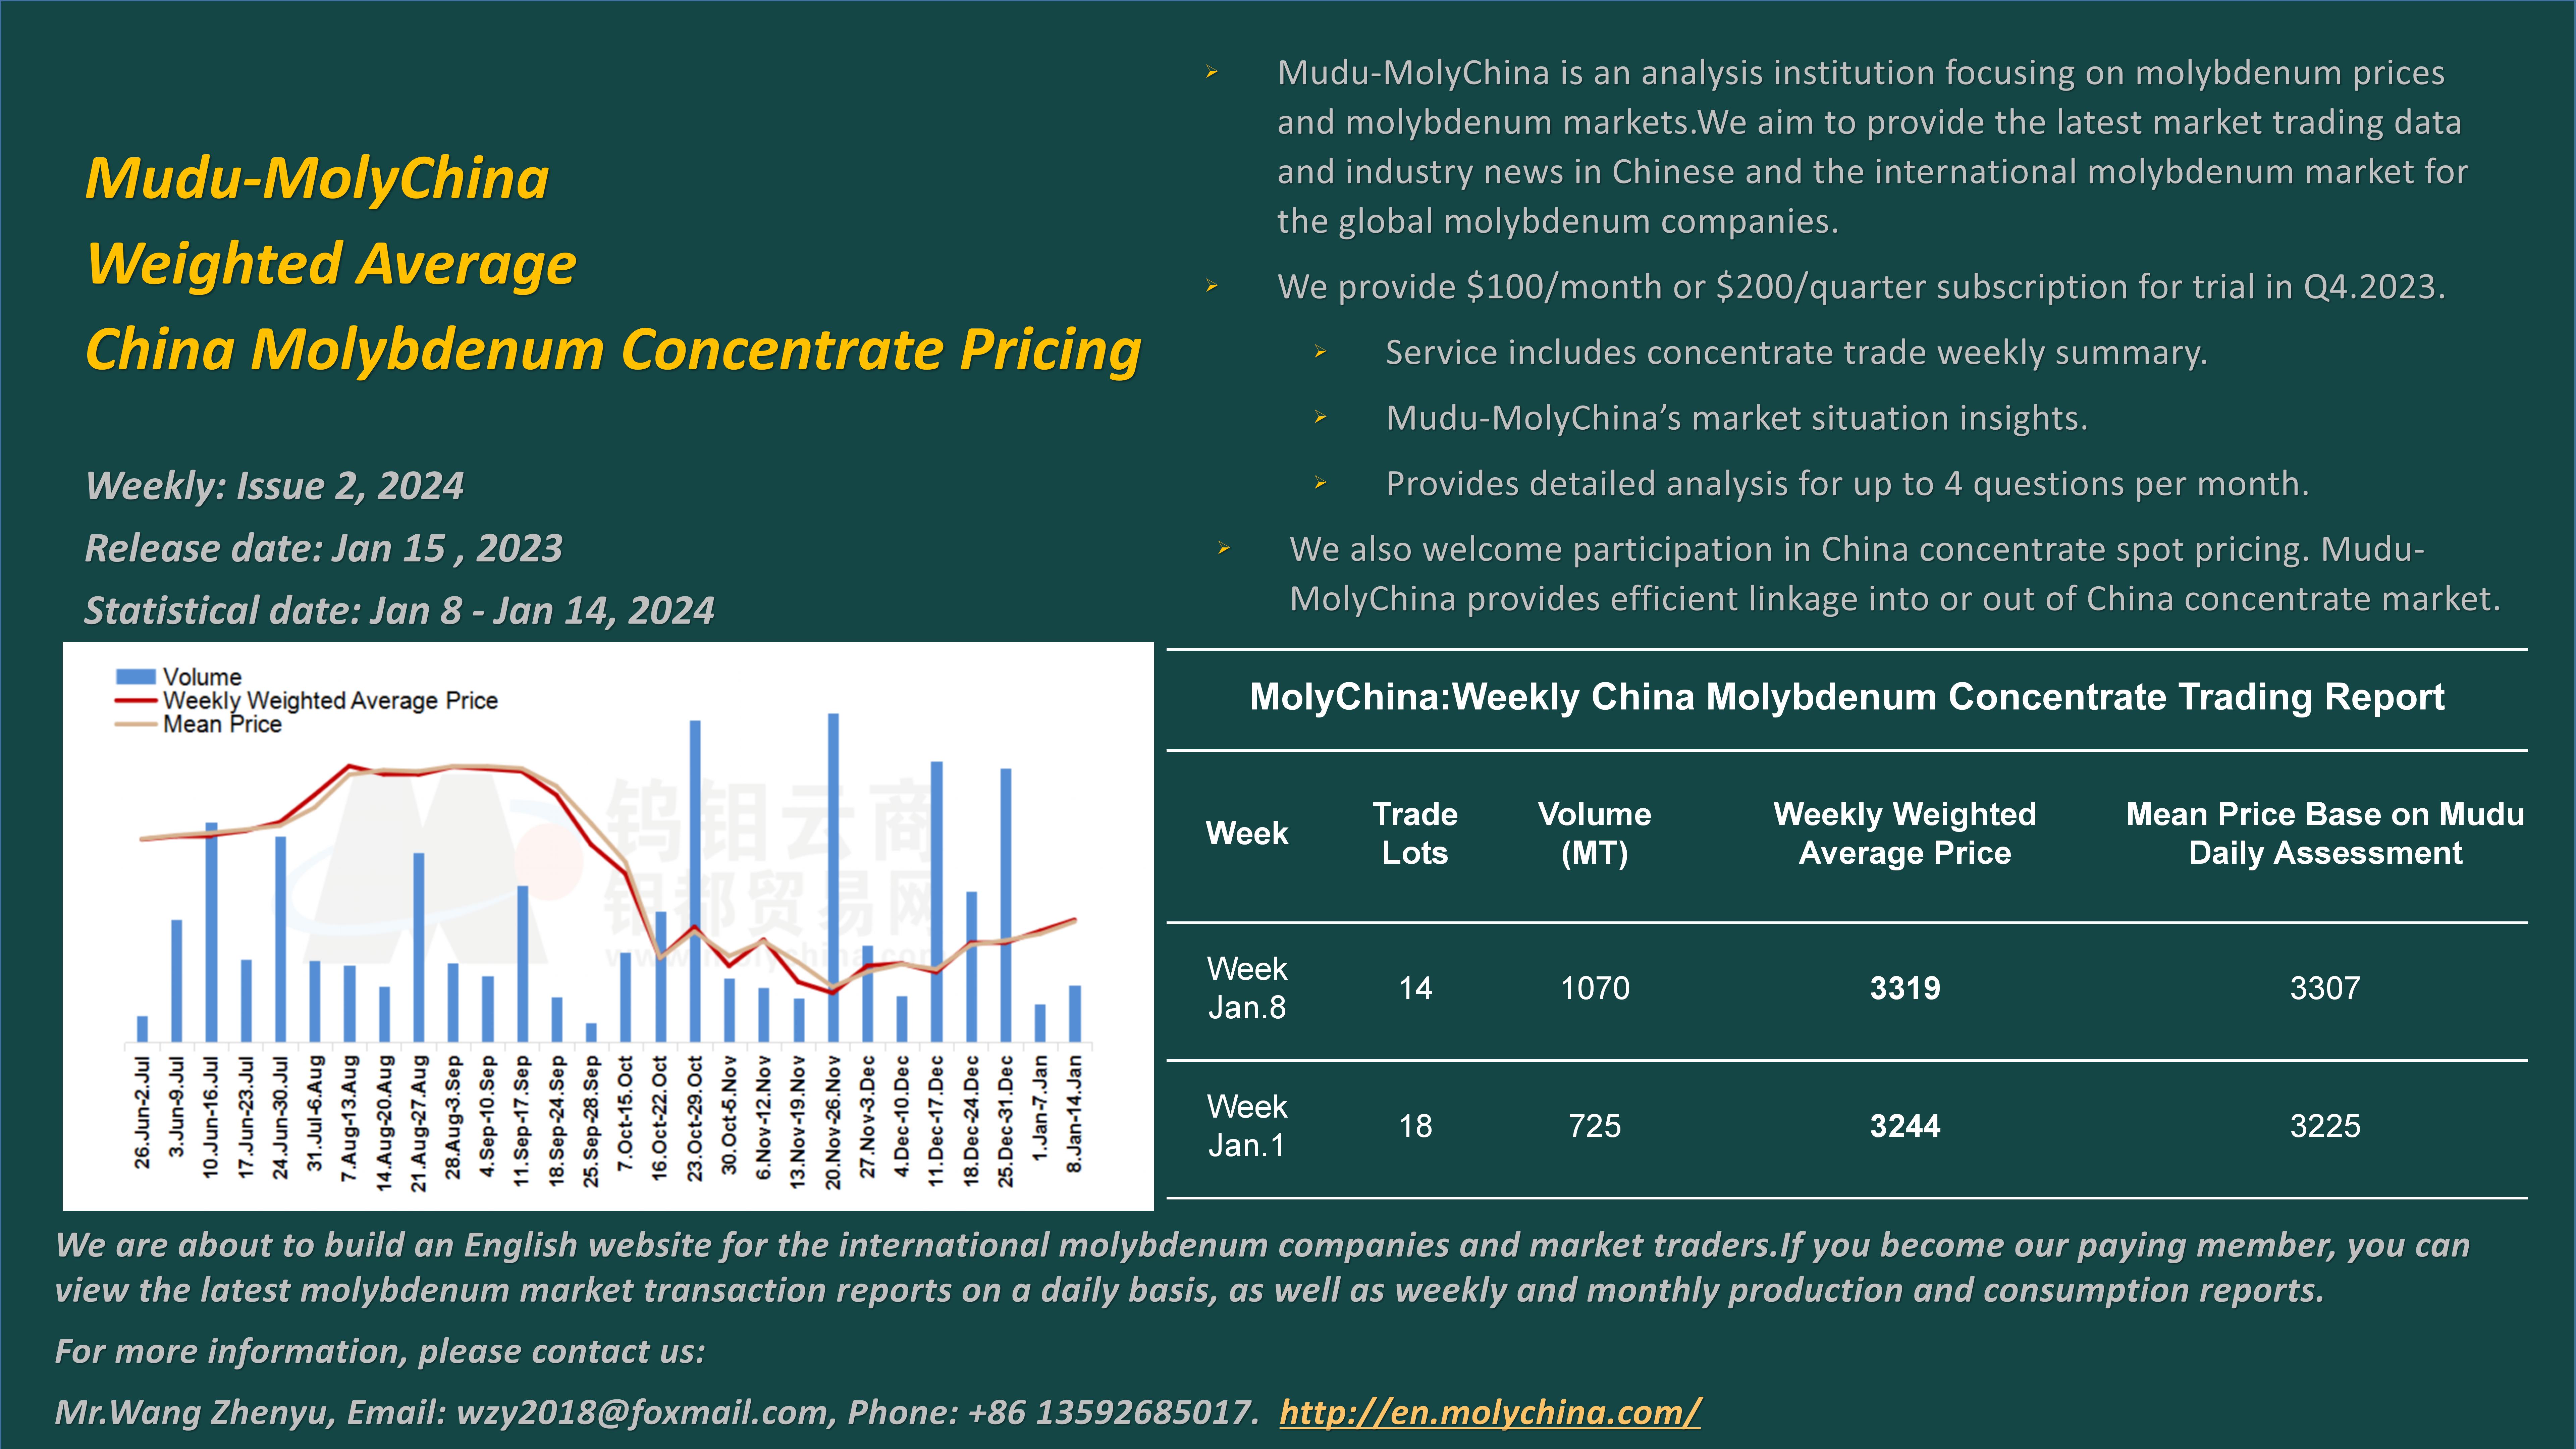 Jan.15-MolyChina Weekly Weighted Average Price Report.jpg